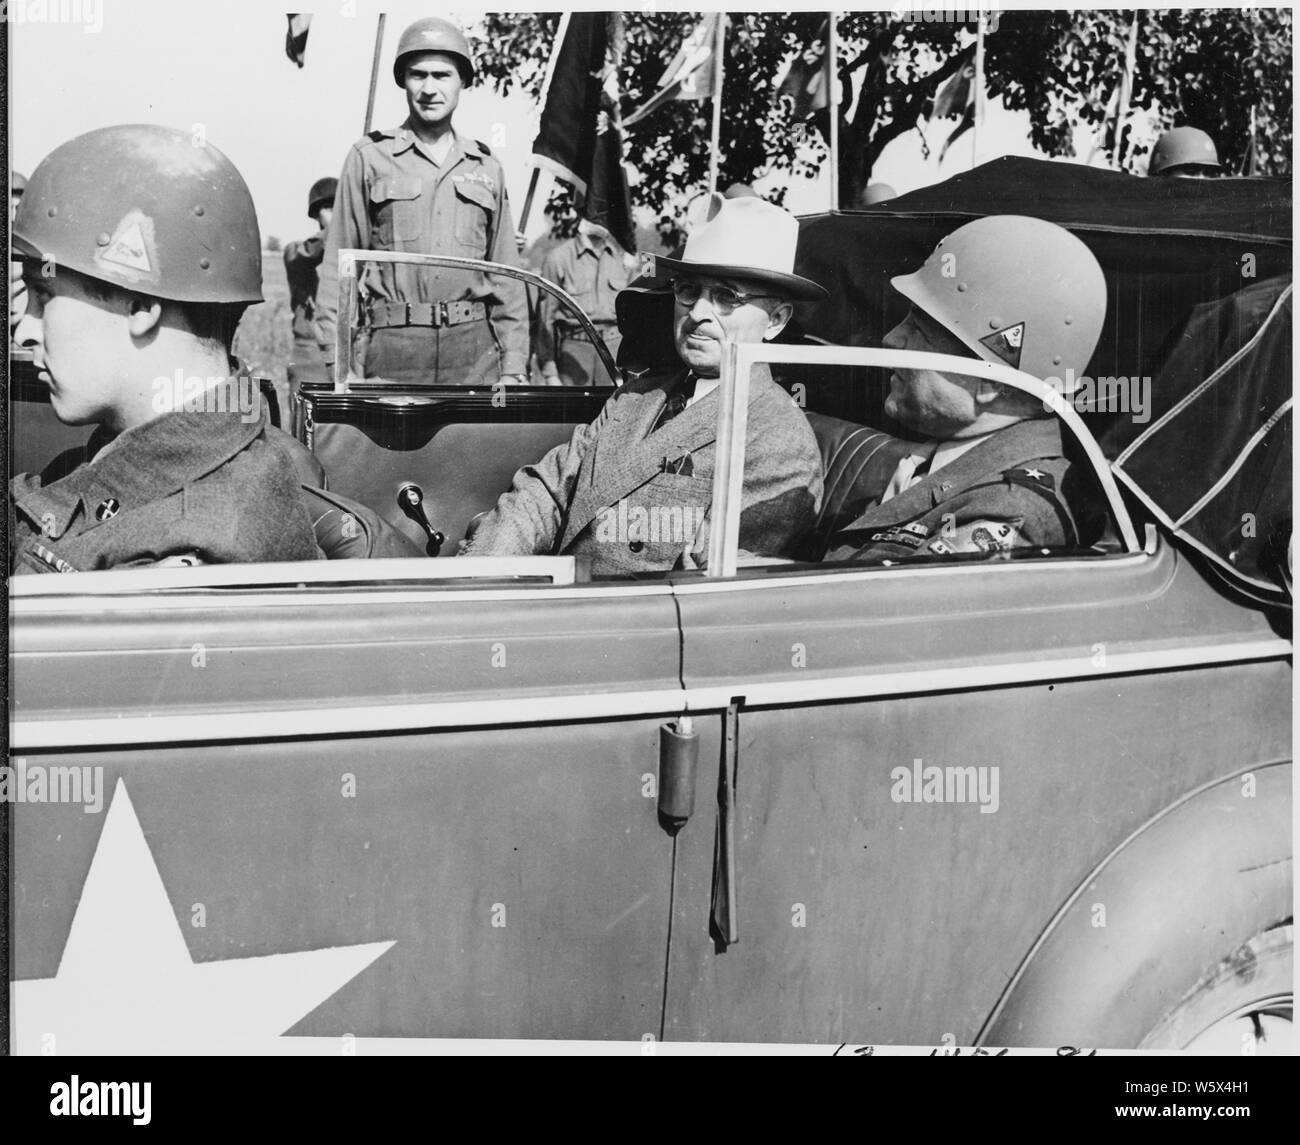 President Harry S. Truman is sitting in a sedan with Brig. Gen. Doyle O. Hickey, Commanding General of the 3rd Armored Division during the President's visit to inspect troops in Neuisenburg, Germany. The President has just left the Potsdam Conference for a quick tour of the American occupied area. Stock Photo